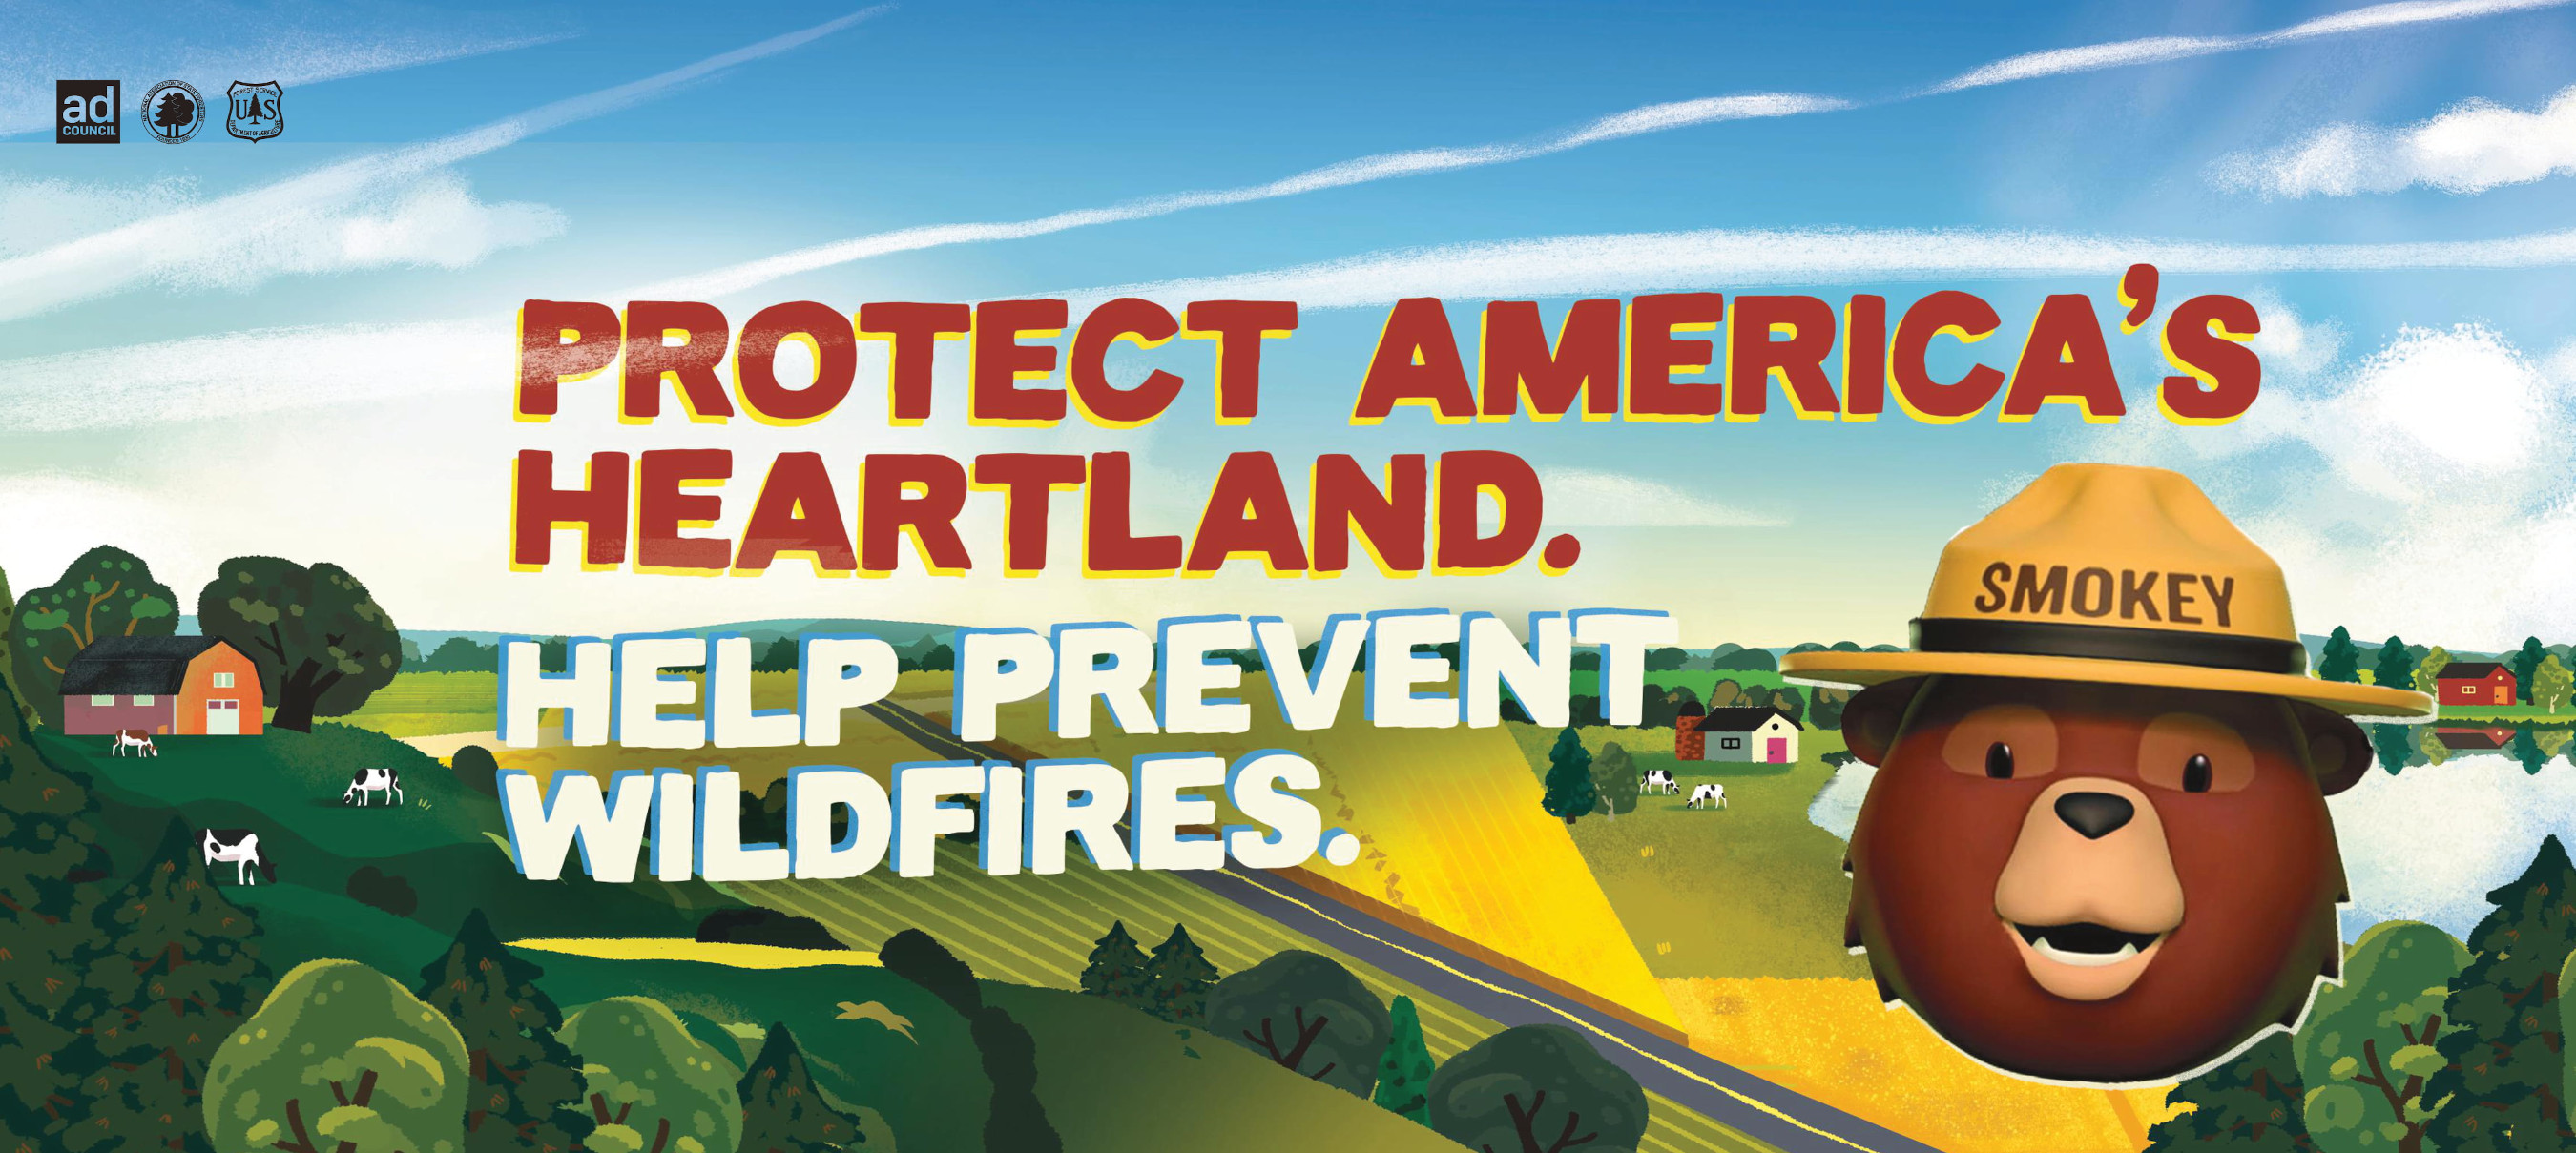 Smokey Bear OOH for the Midwest | Wildfire Prevention | Ad Council